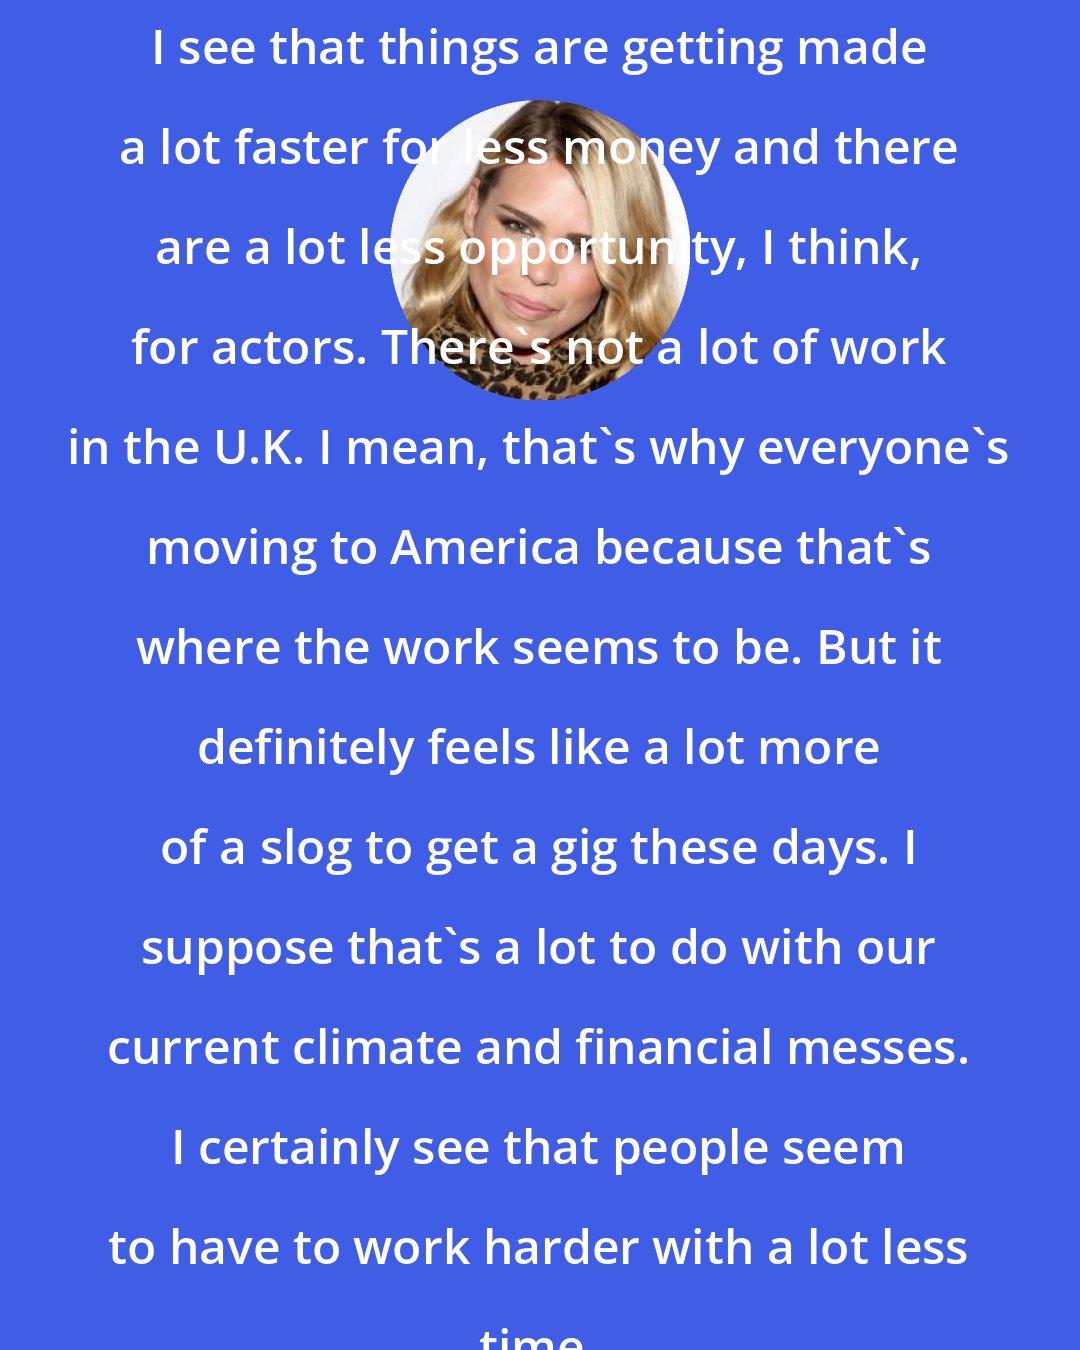 Billie Piper: I see that things are getting made a lot faster for less money and there are a lot less opportunity, I think, for actors. There's not a lot of work in the U.K. I mean, that's why everyone's moving to America because that's where the work seems to be. But it definitely feels like a lot more of a slog to get a gig these days. I suppose that's a lot to do with our current climate and financial messes. I certainly see that people seem to have to work harder with a lot less time.